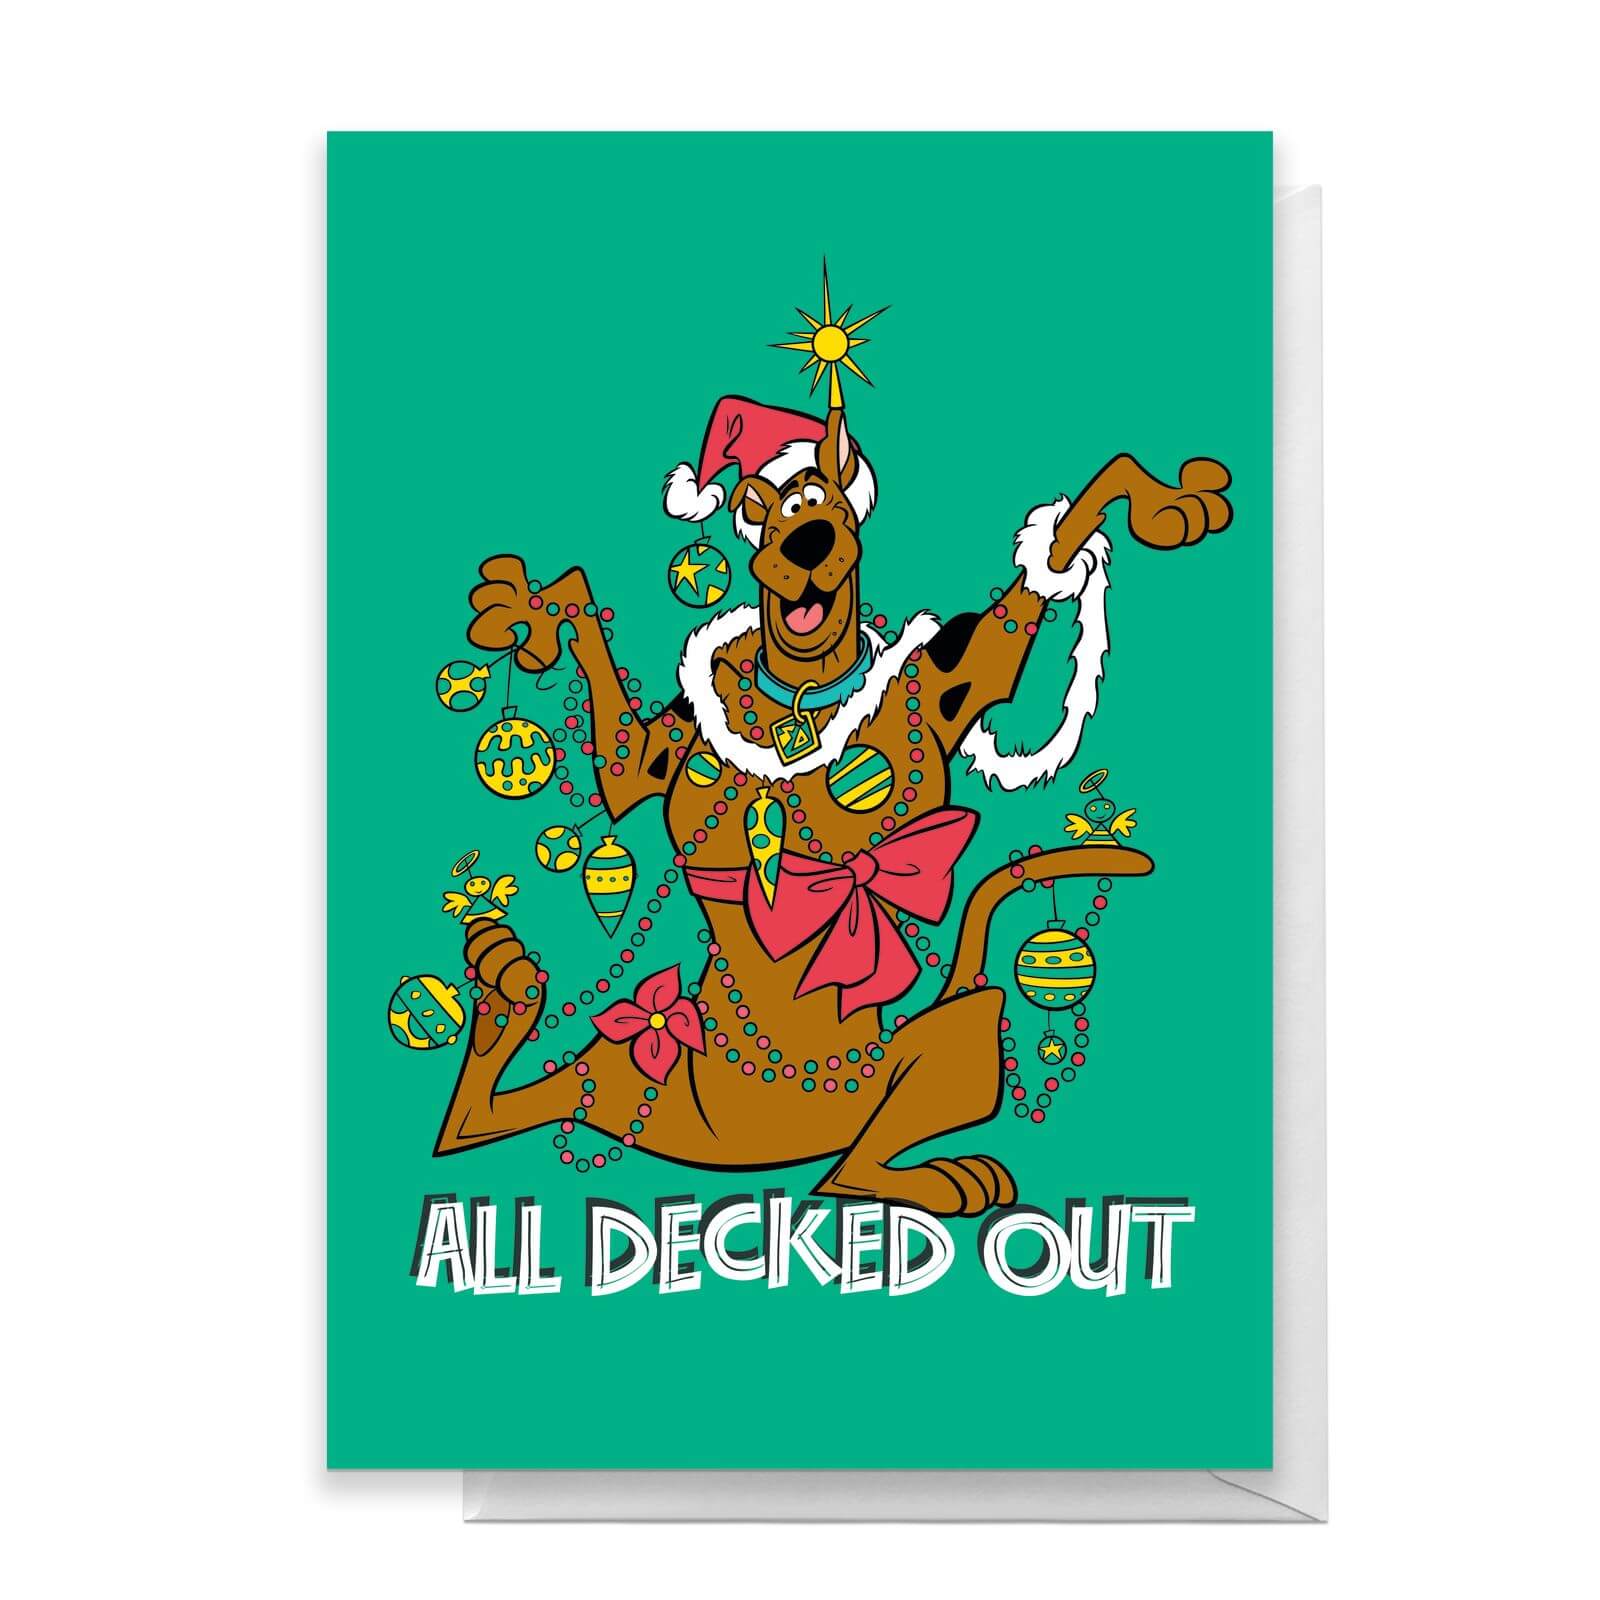 Scooby Doo All Decked Out Greetings Card   Standard Card